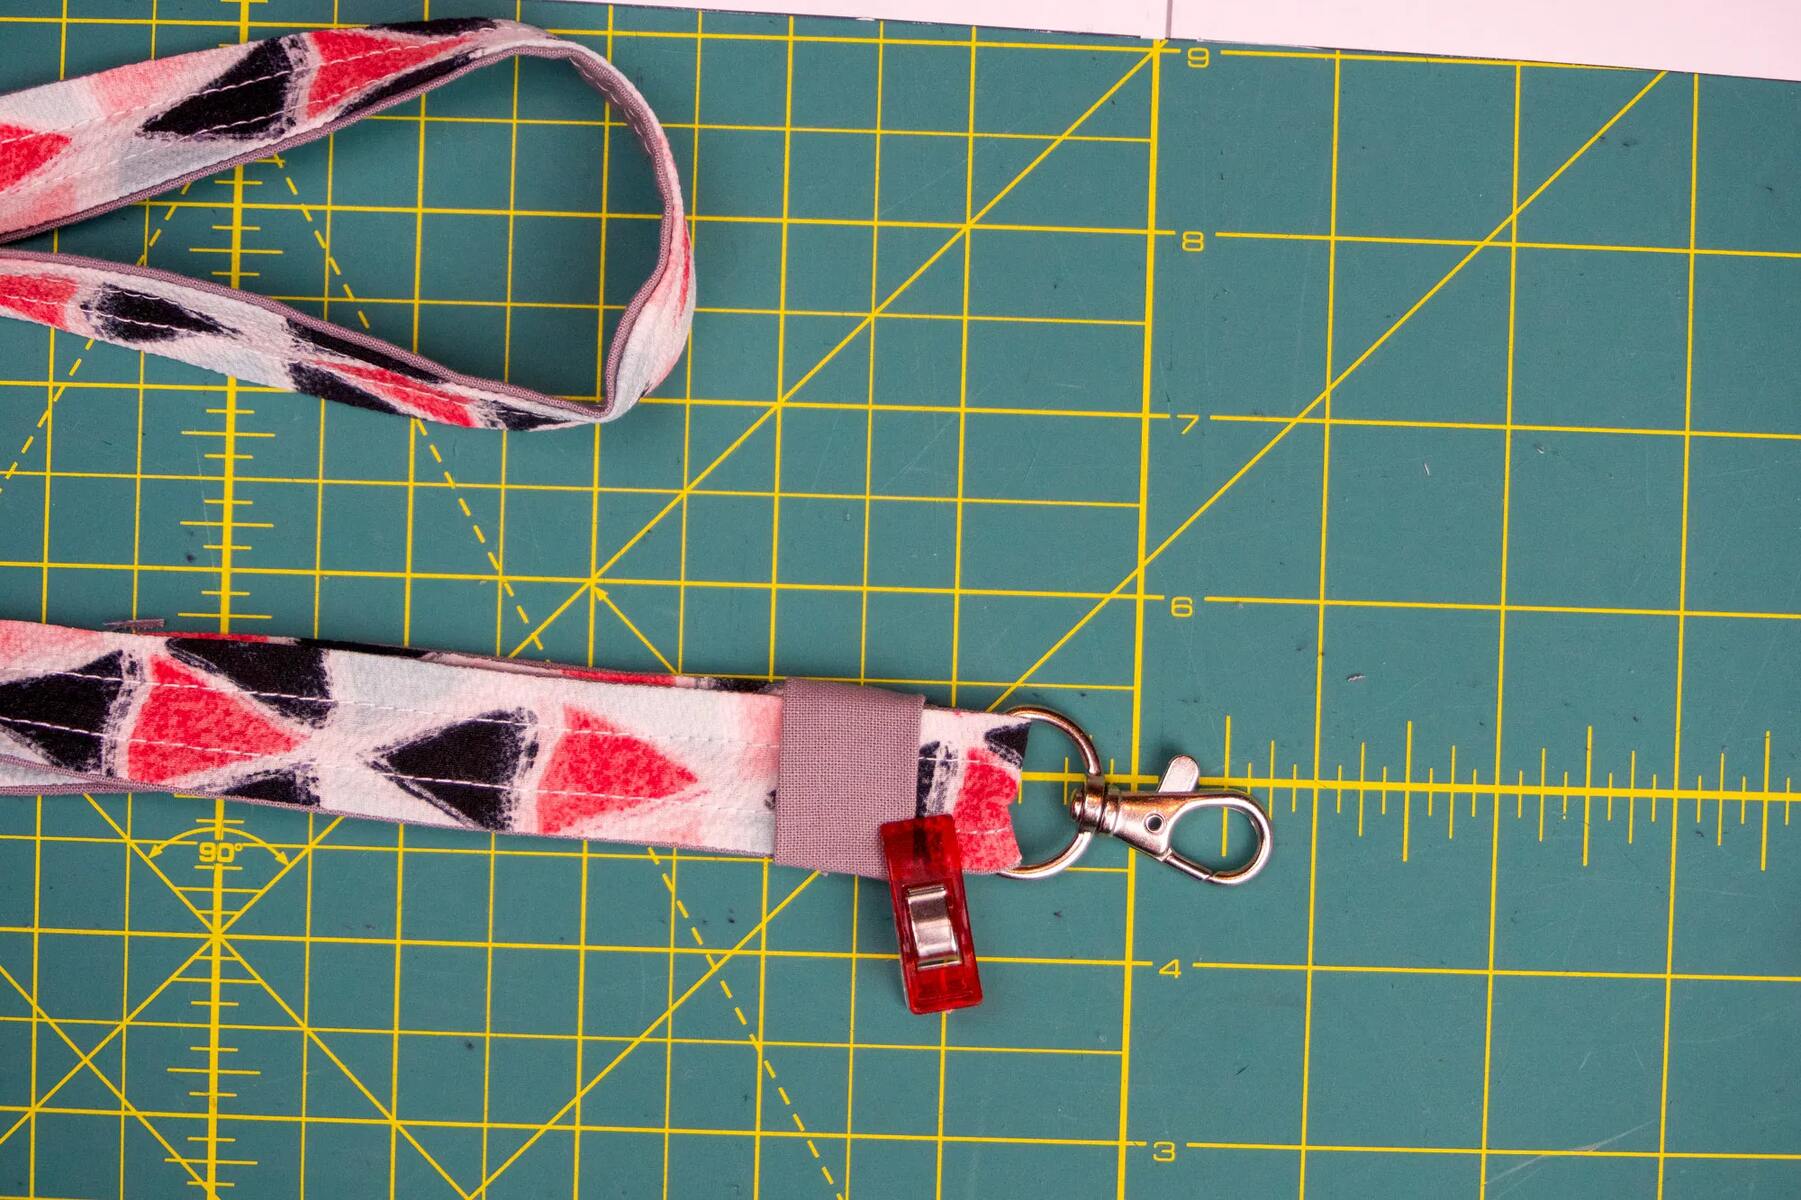 Finishing Touch: Properly Concluding Your Lanyard Project